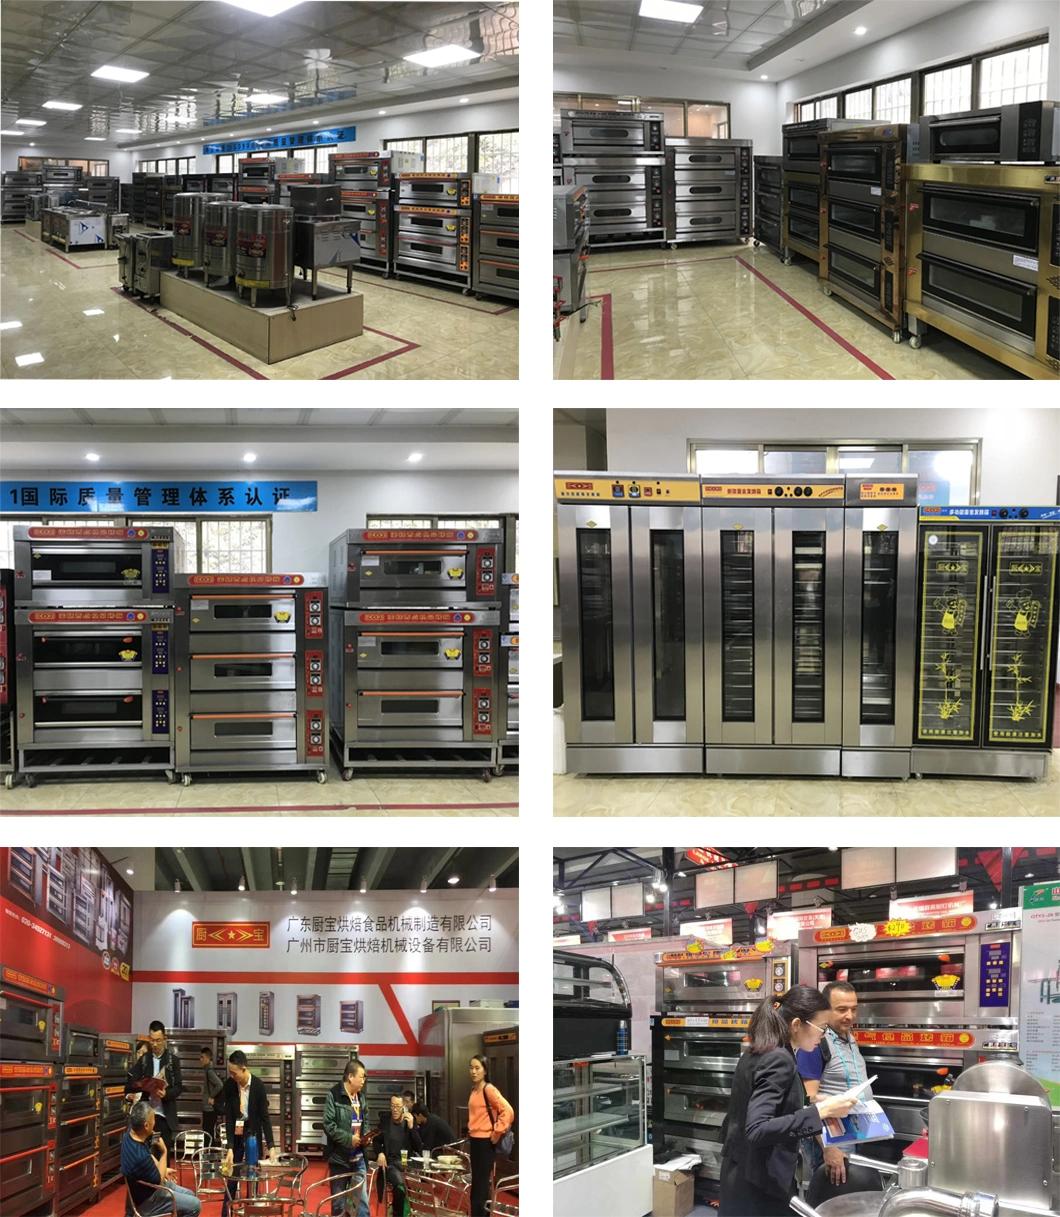 1 Deck 3 Trays Electric Pizza Oven for Commercial Restaurant Kitchen Baking Equipment Bakery Machine Food Machinery